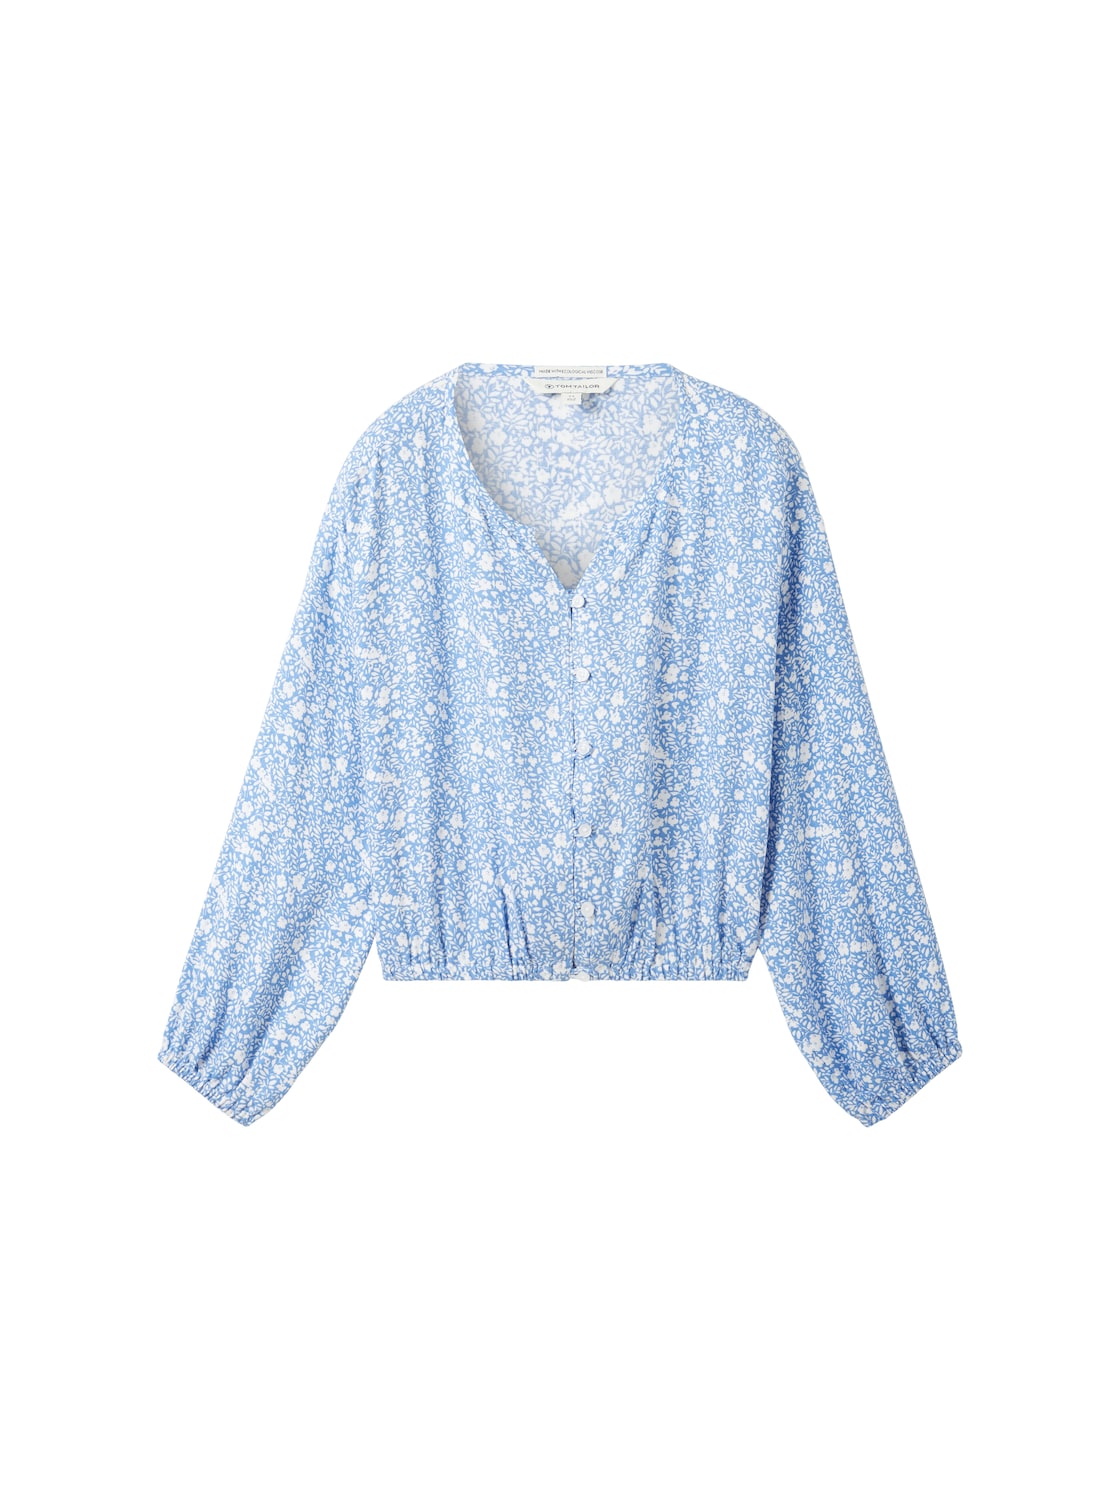 TOM TAILOR Mädchen Copped Bluse mit Allover Print, blau, Allover Print, Gr. 140 von Tom Tailor